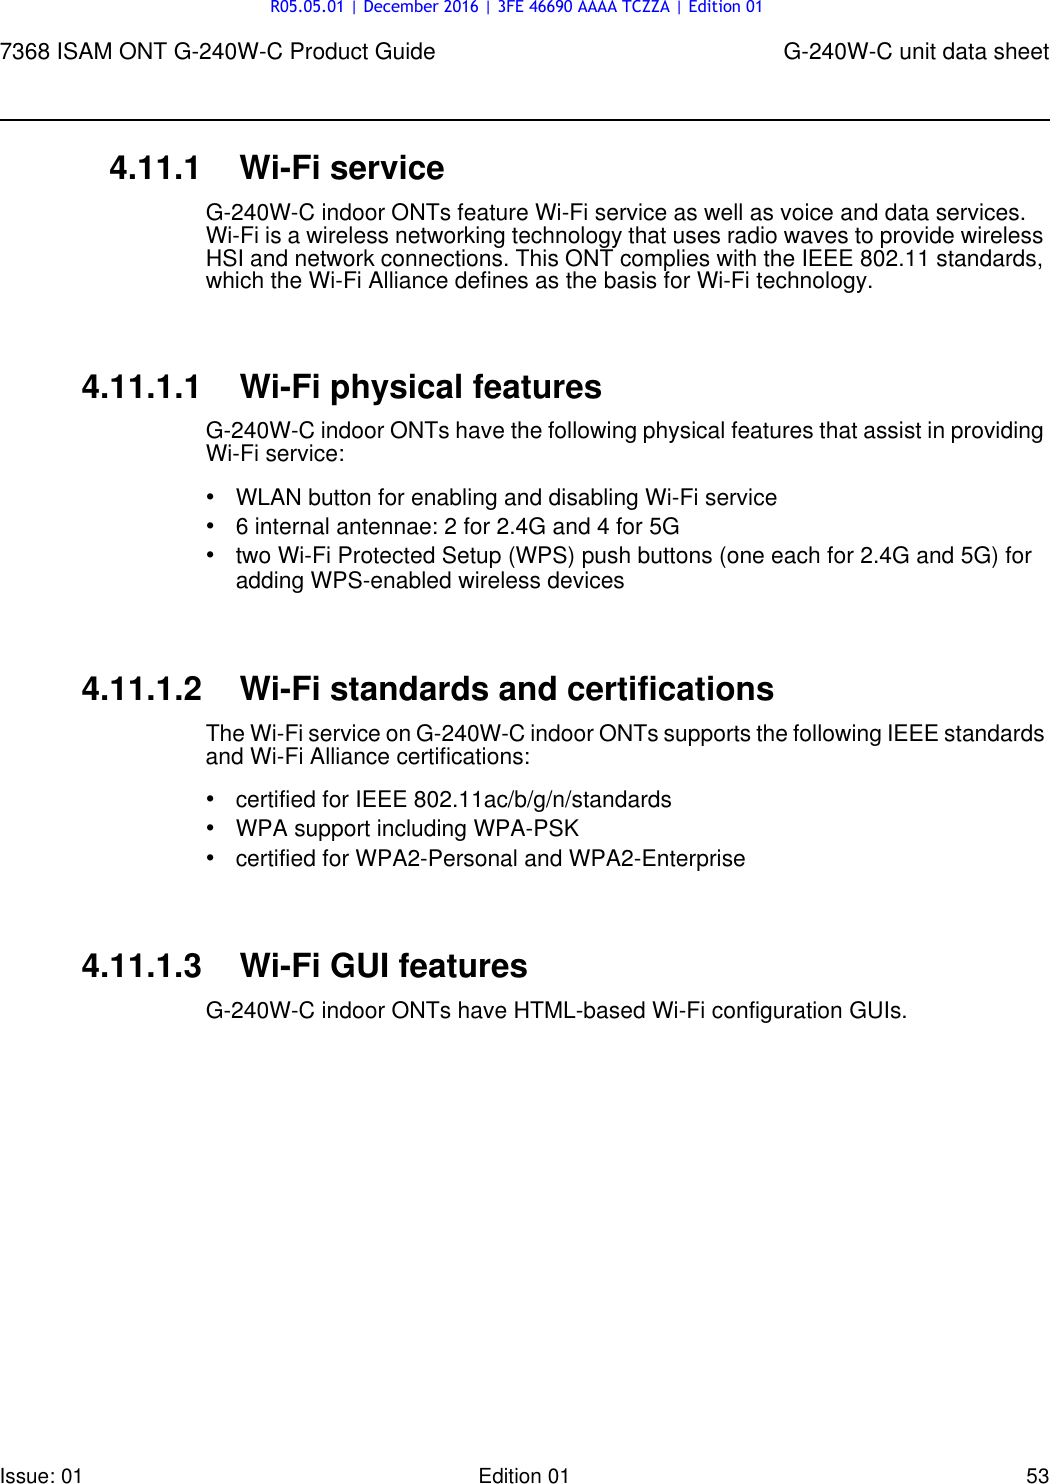 Page 53 of Nokia Bell G240W-C GPON ONU User Manual 7368 ISAM ONT G 240W B Product Guide